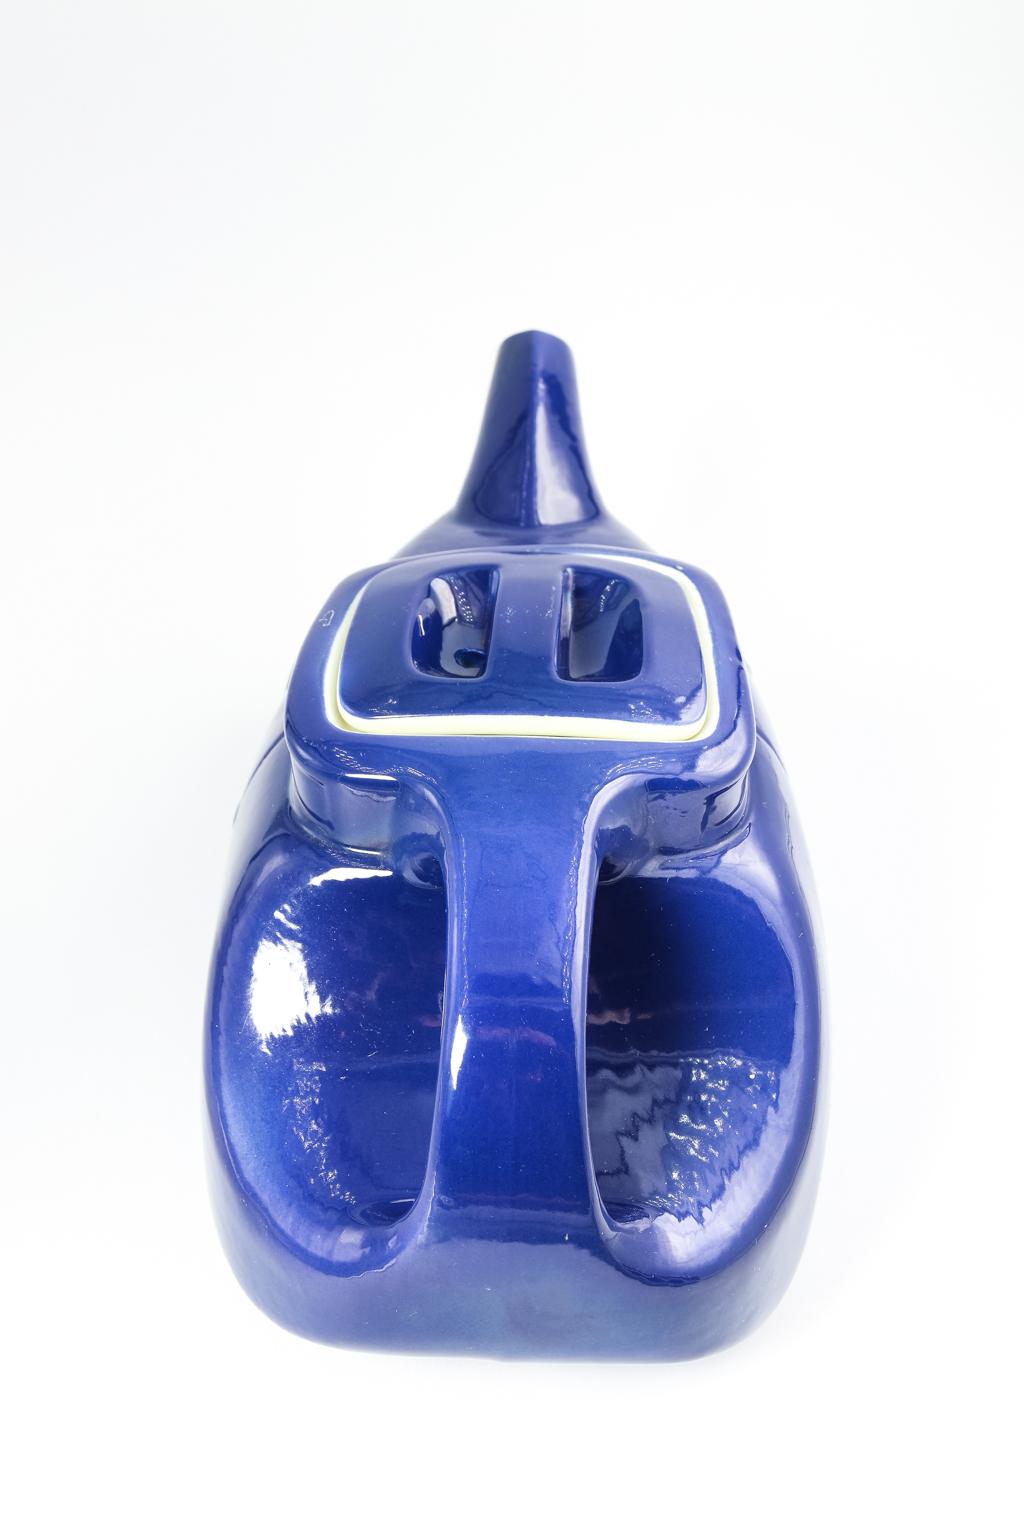 Automobile Teapot in Royal Blue by Hall, circa 1930s For Sale 3